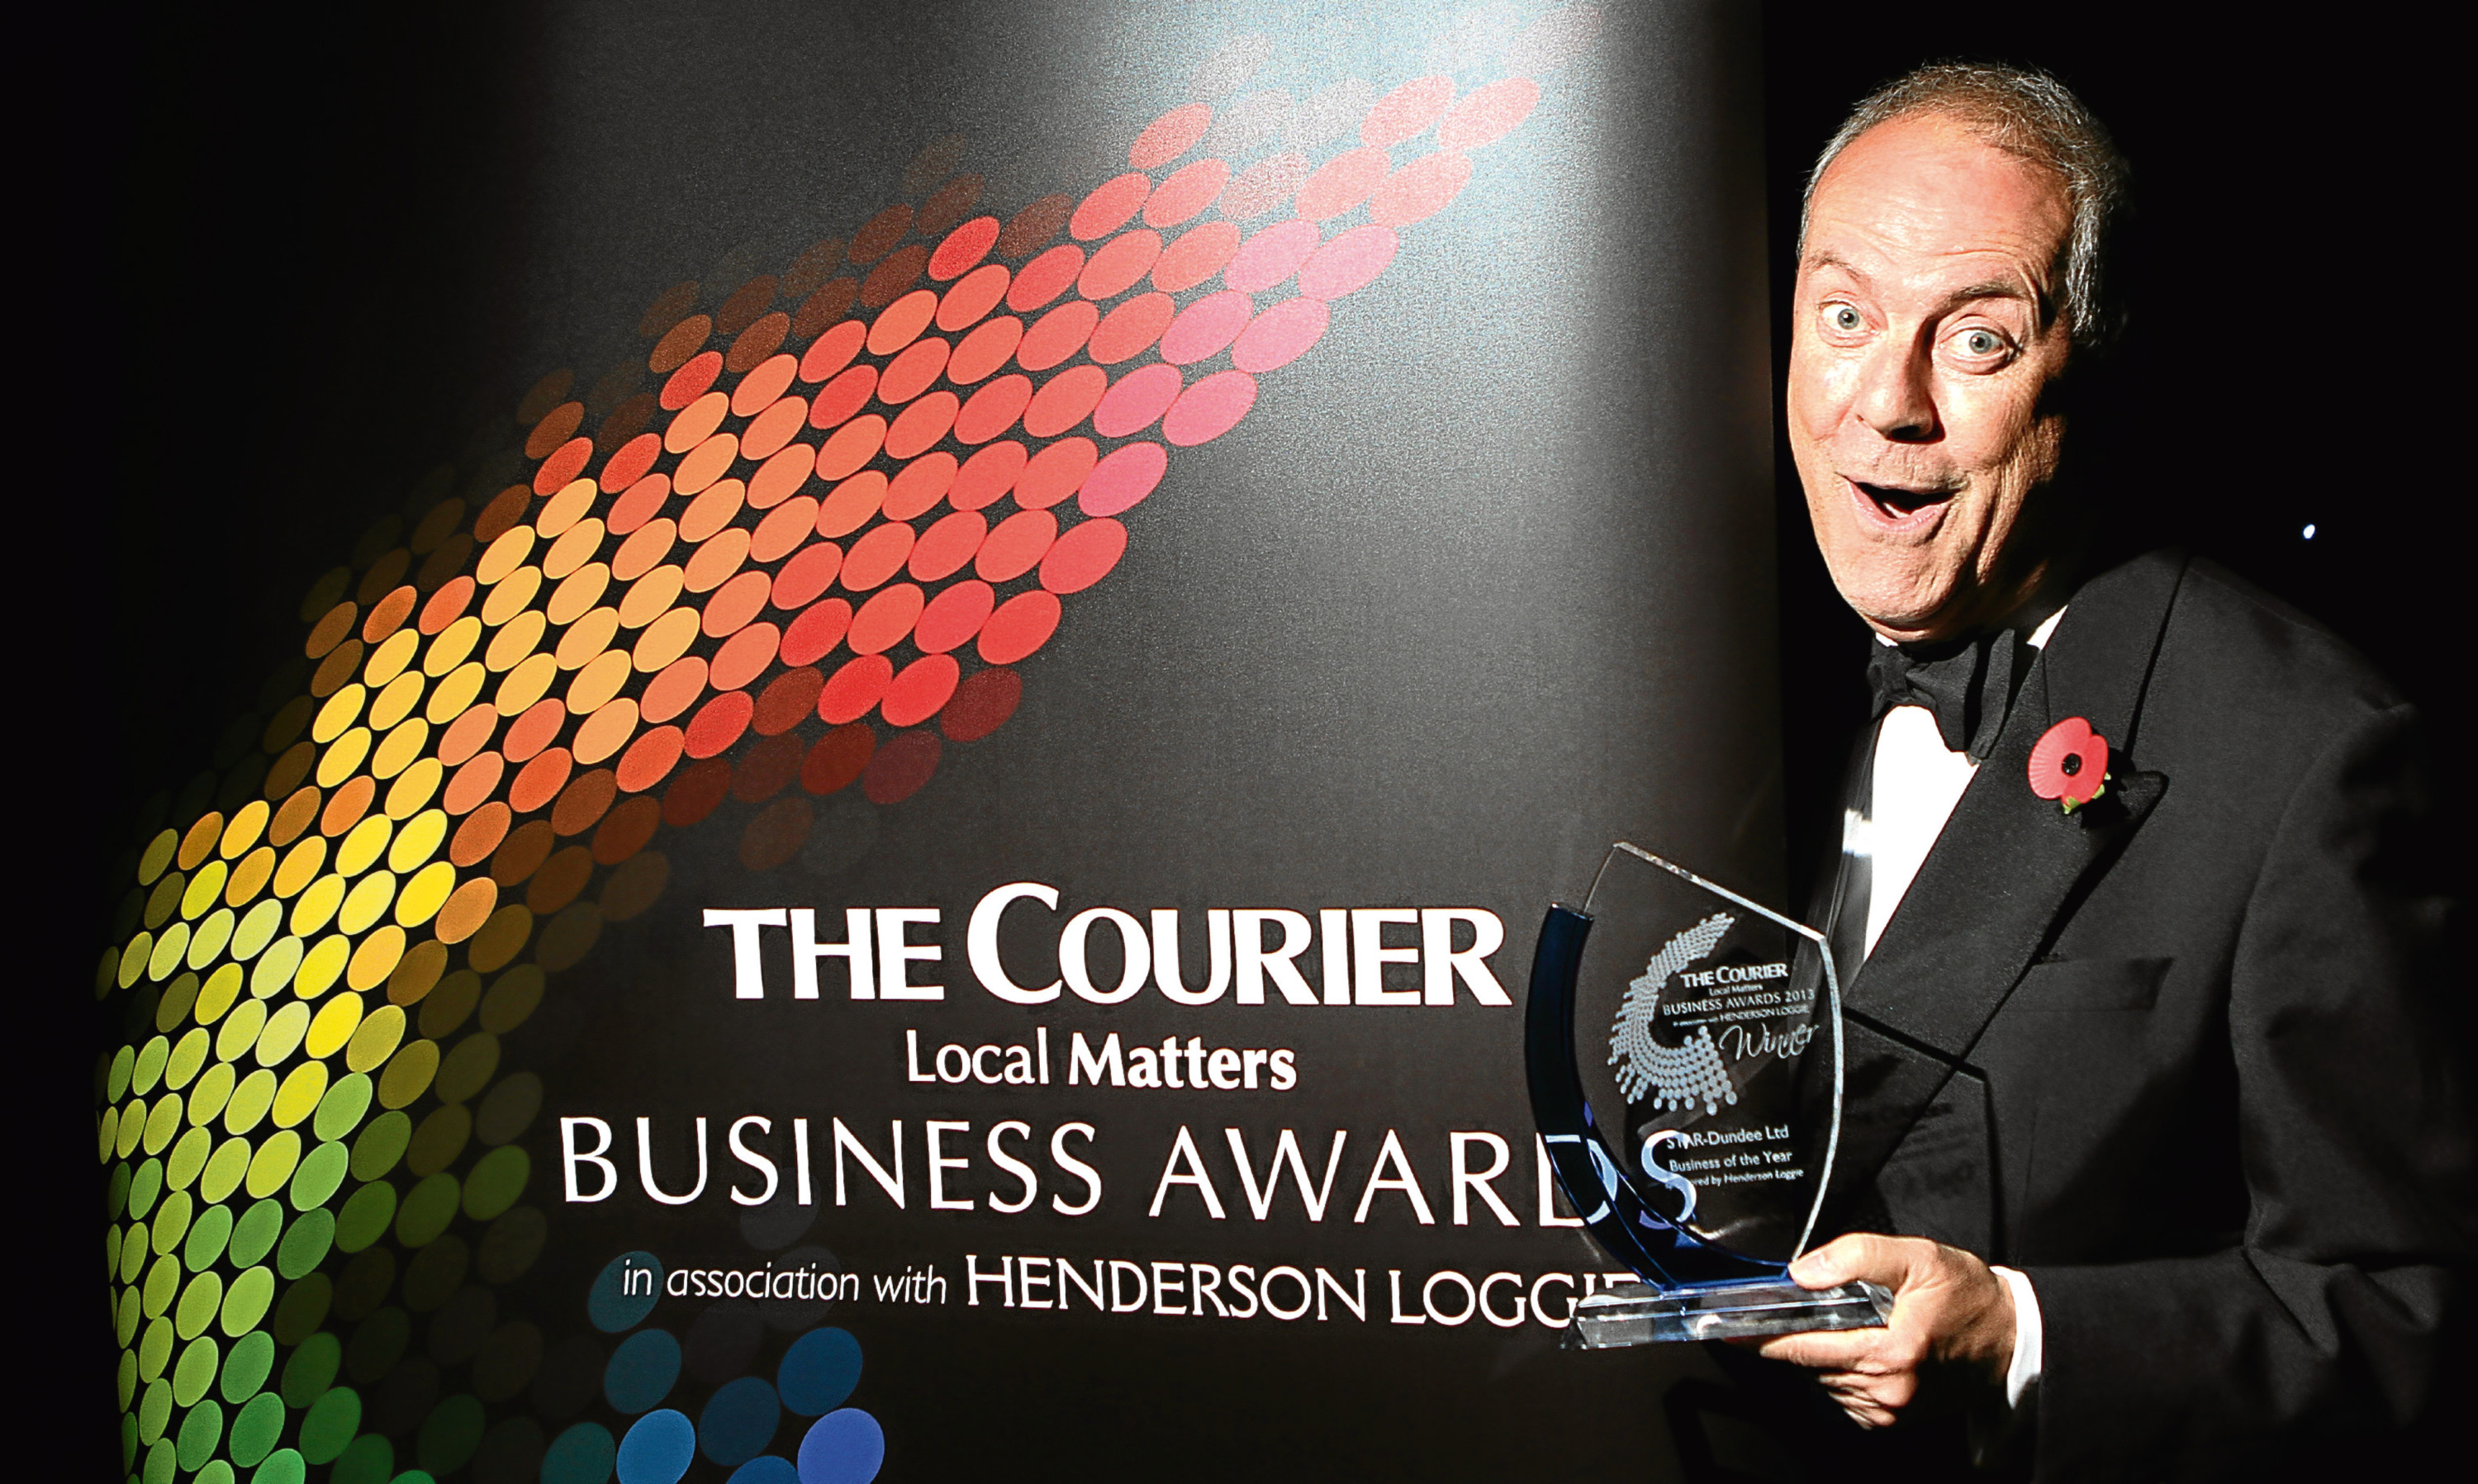 Gyles Brandreth is returning to host the Courier Business Awards for a second time.